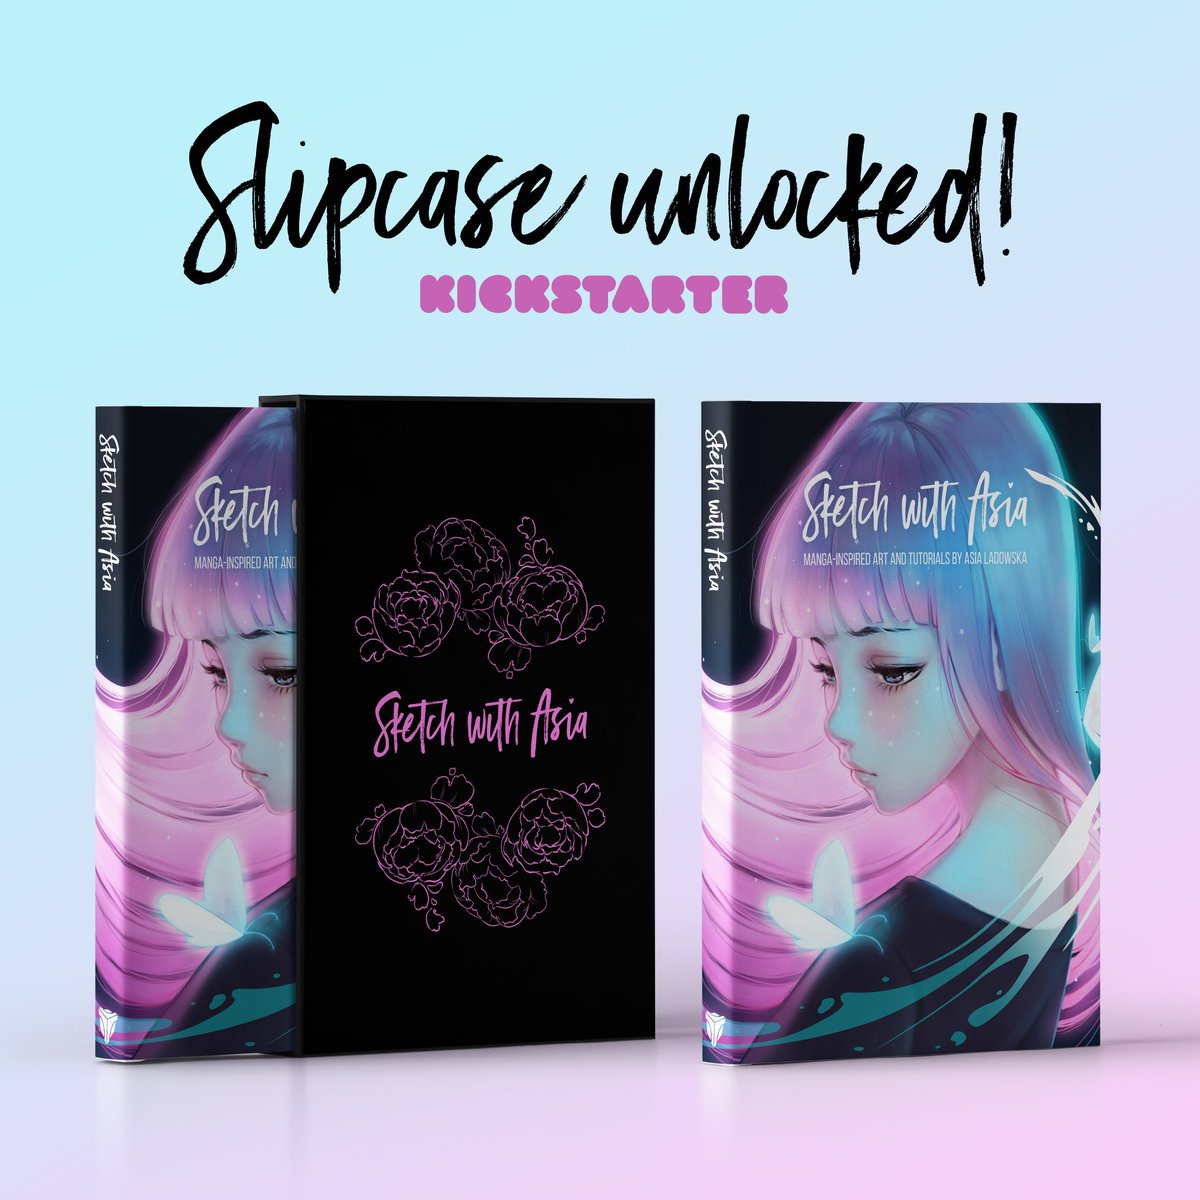 Sketch with Asia Manga-inspired Art and Tutorials by Asia Ladowska